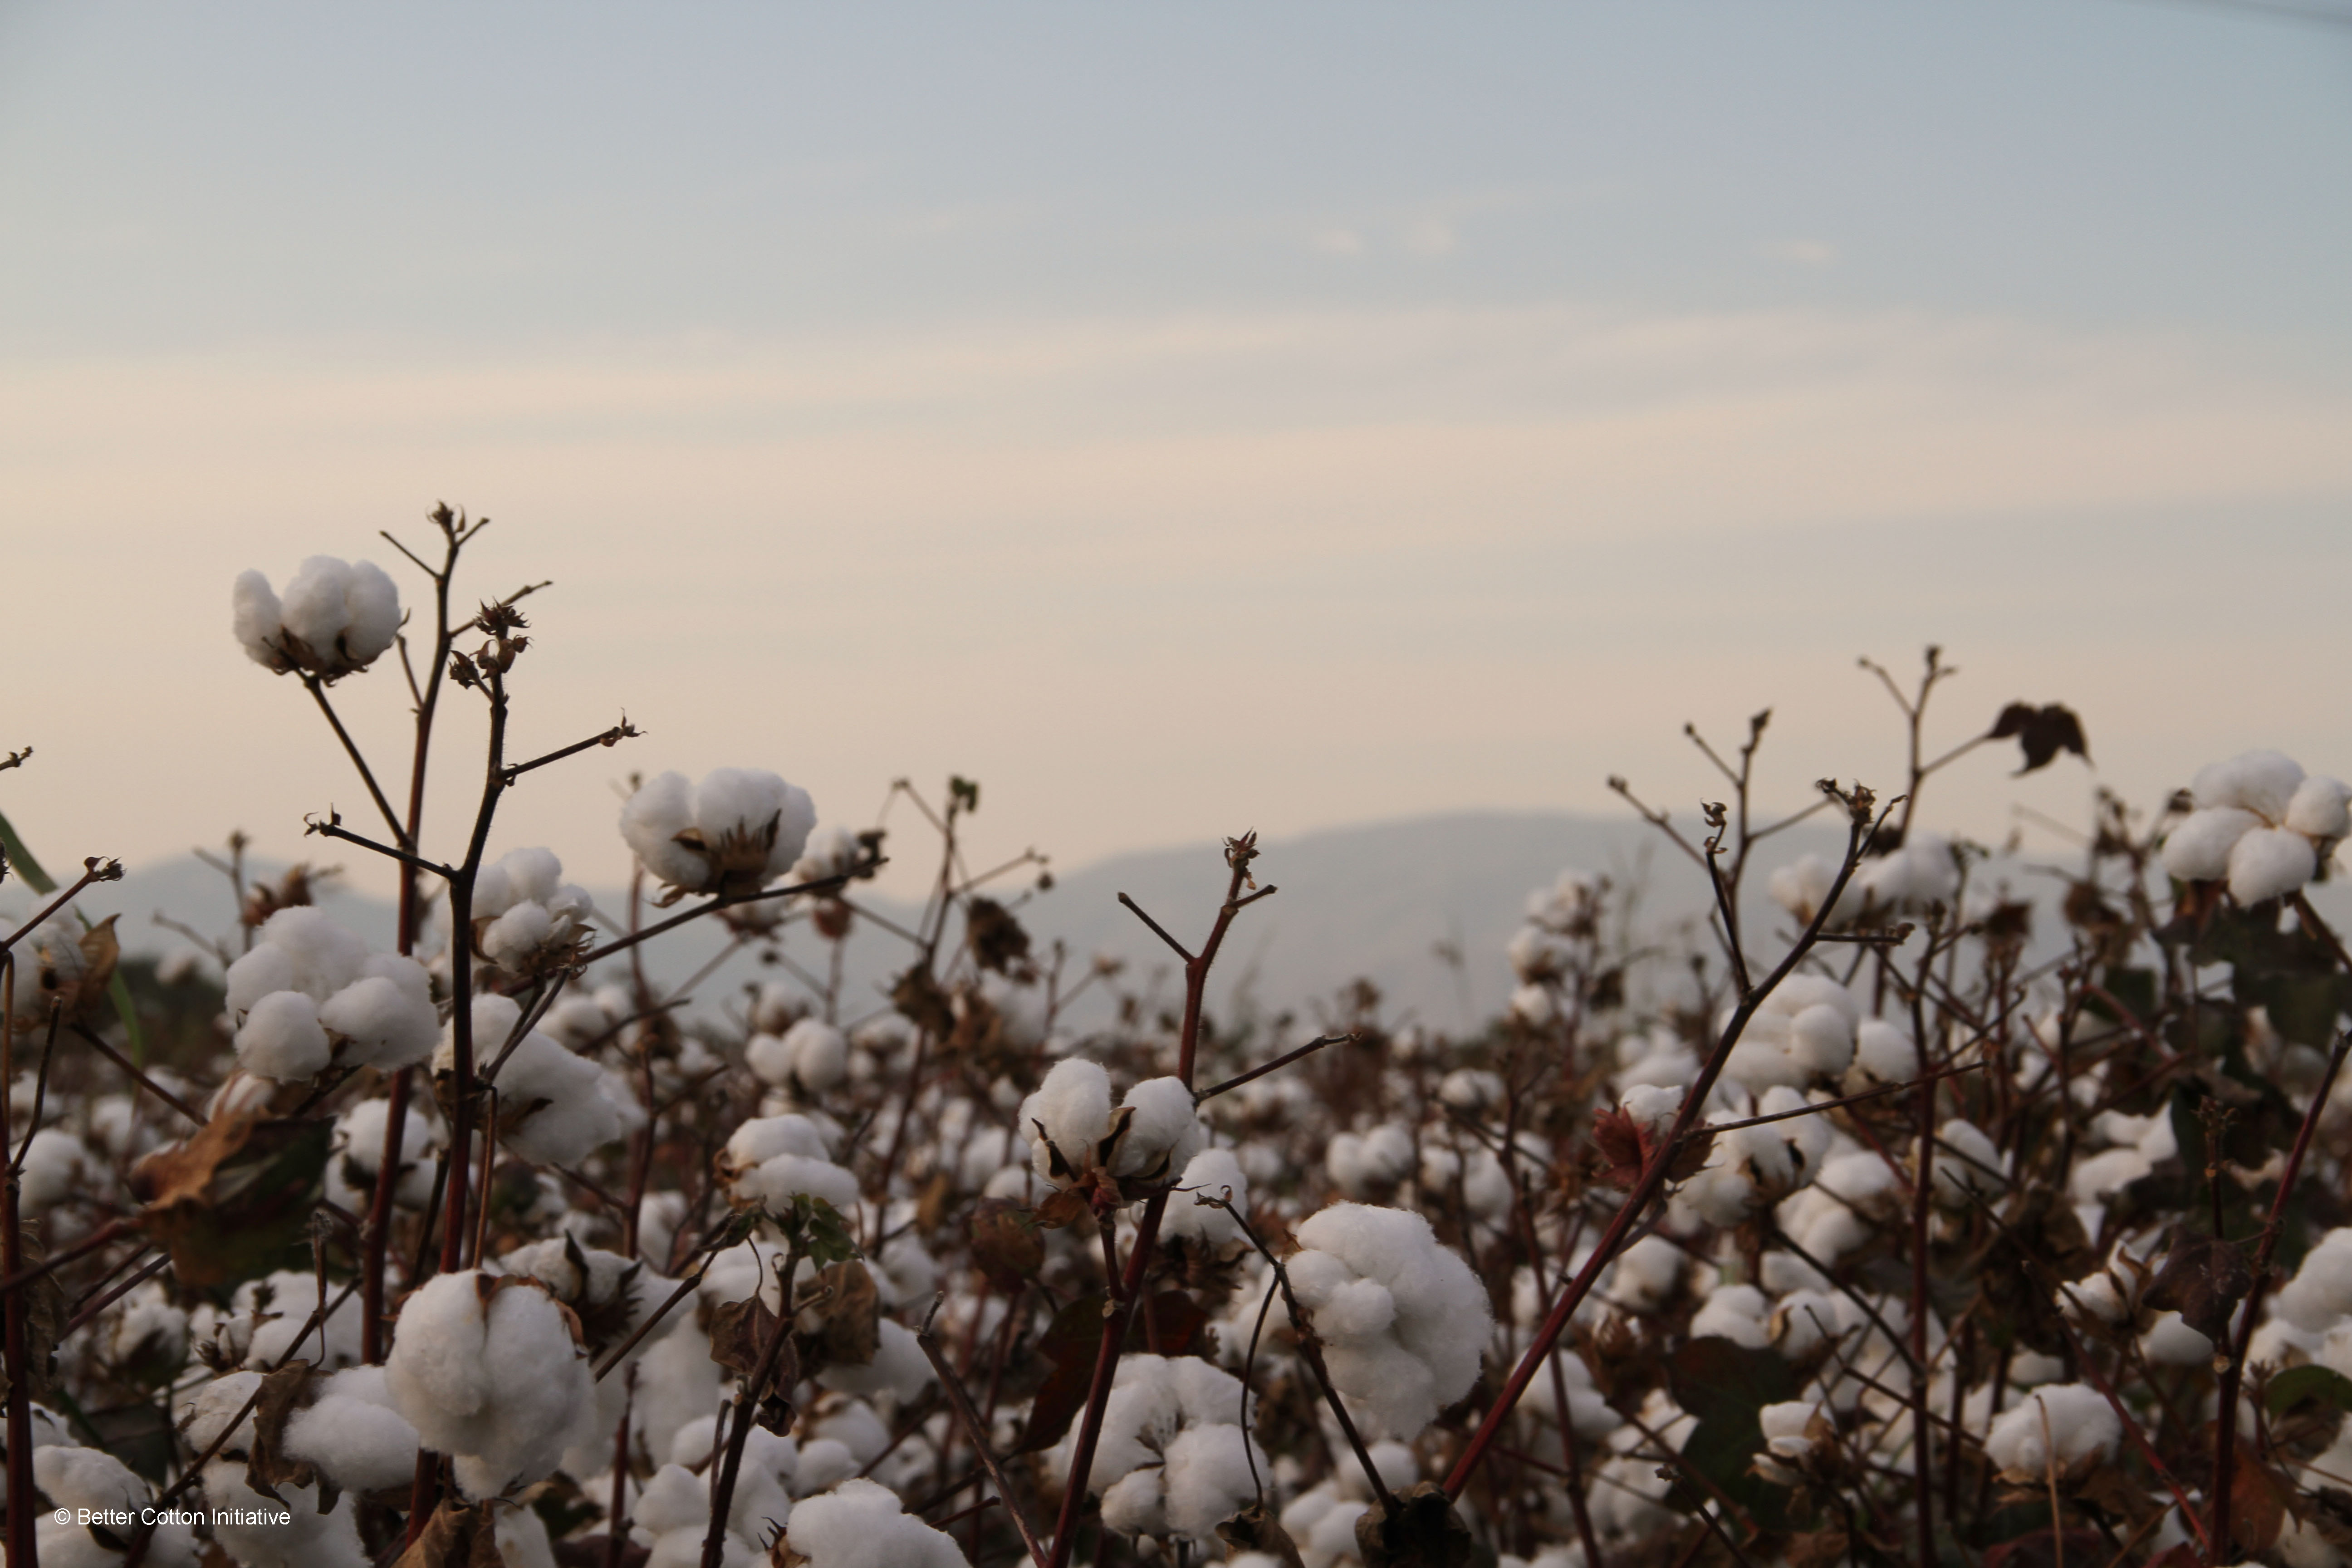 sourcing of cotton